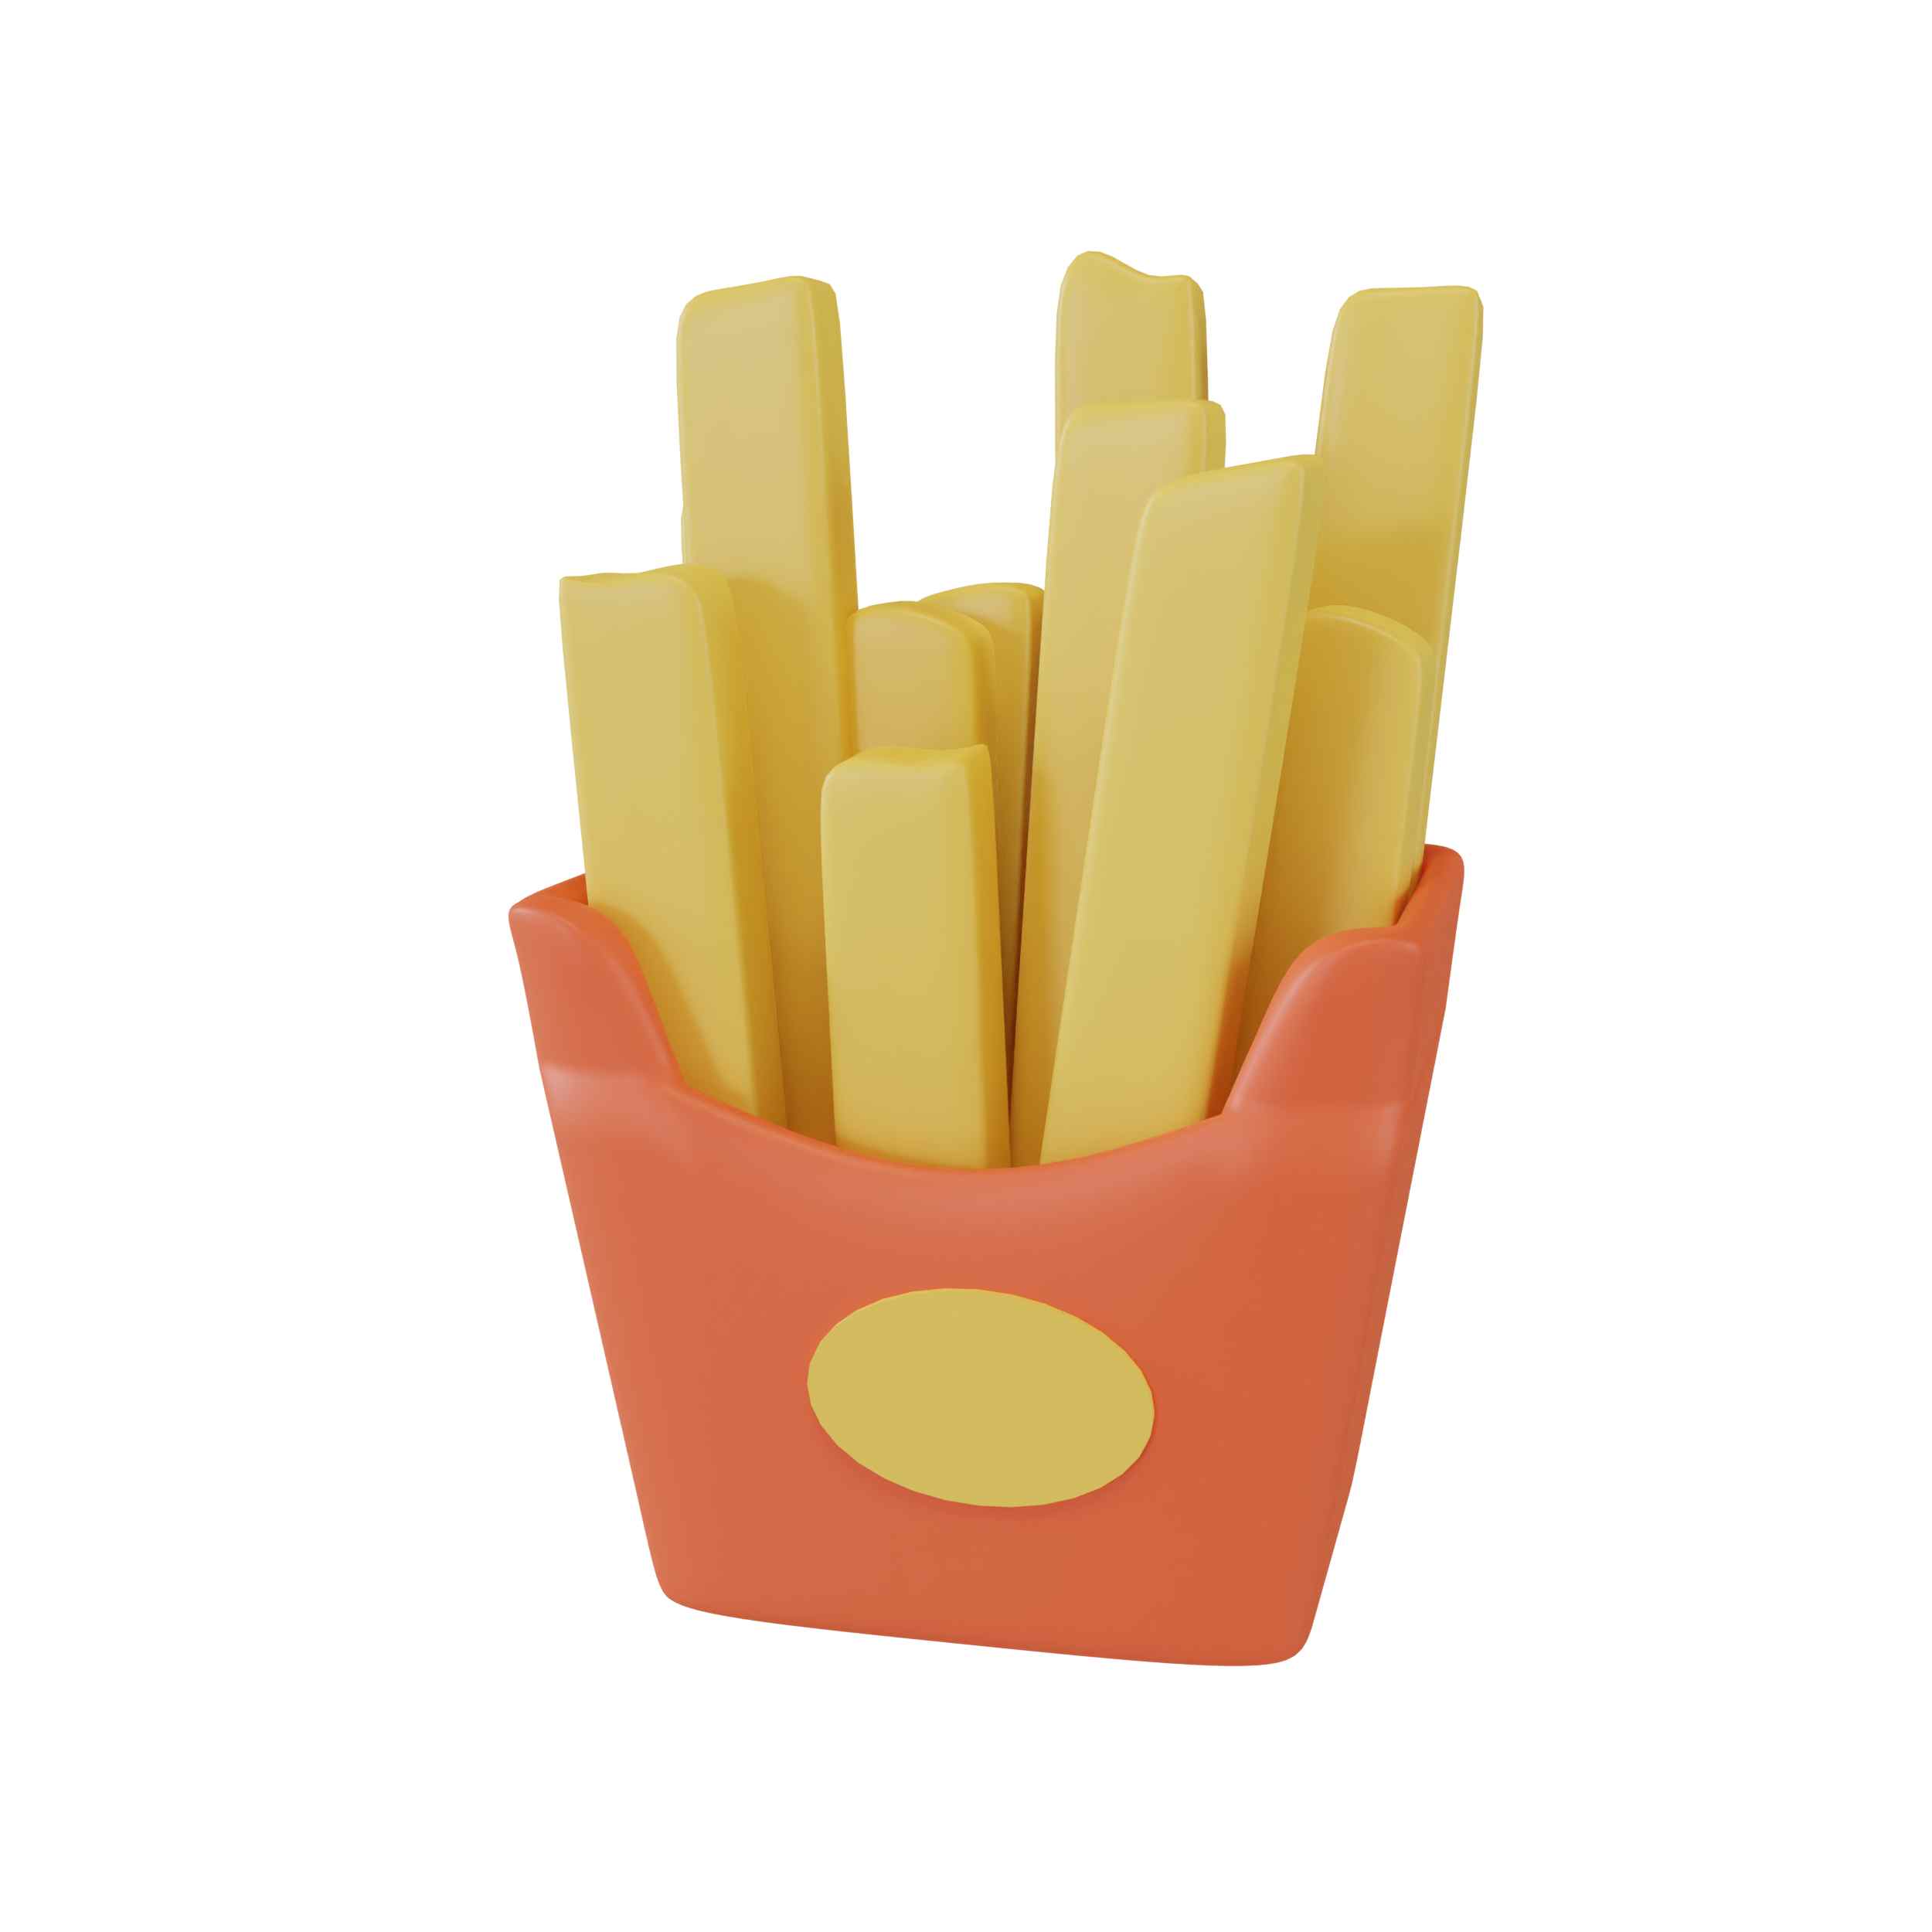 3D French Fries Illustration